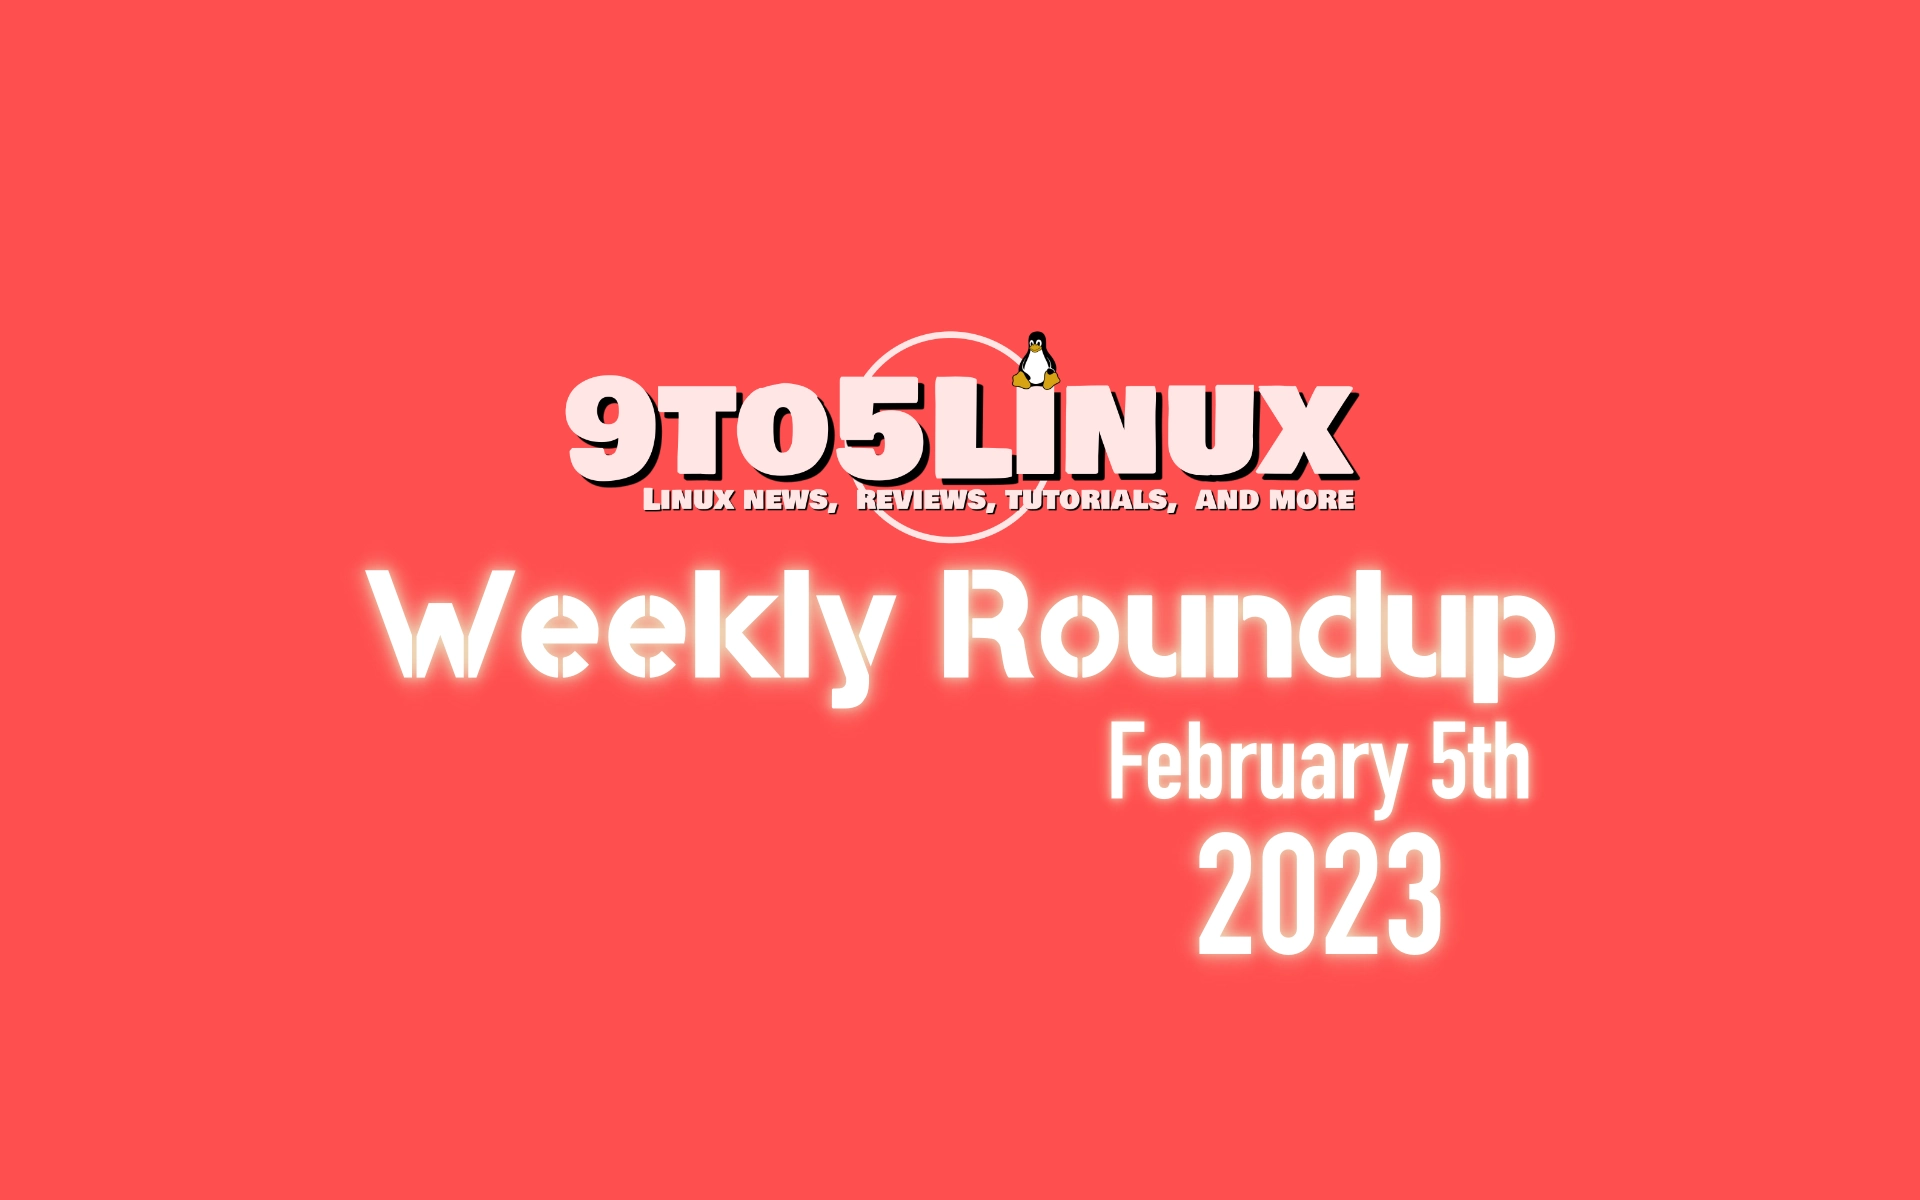 9to5Linux Weekly Roundup: February 5th, 2023